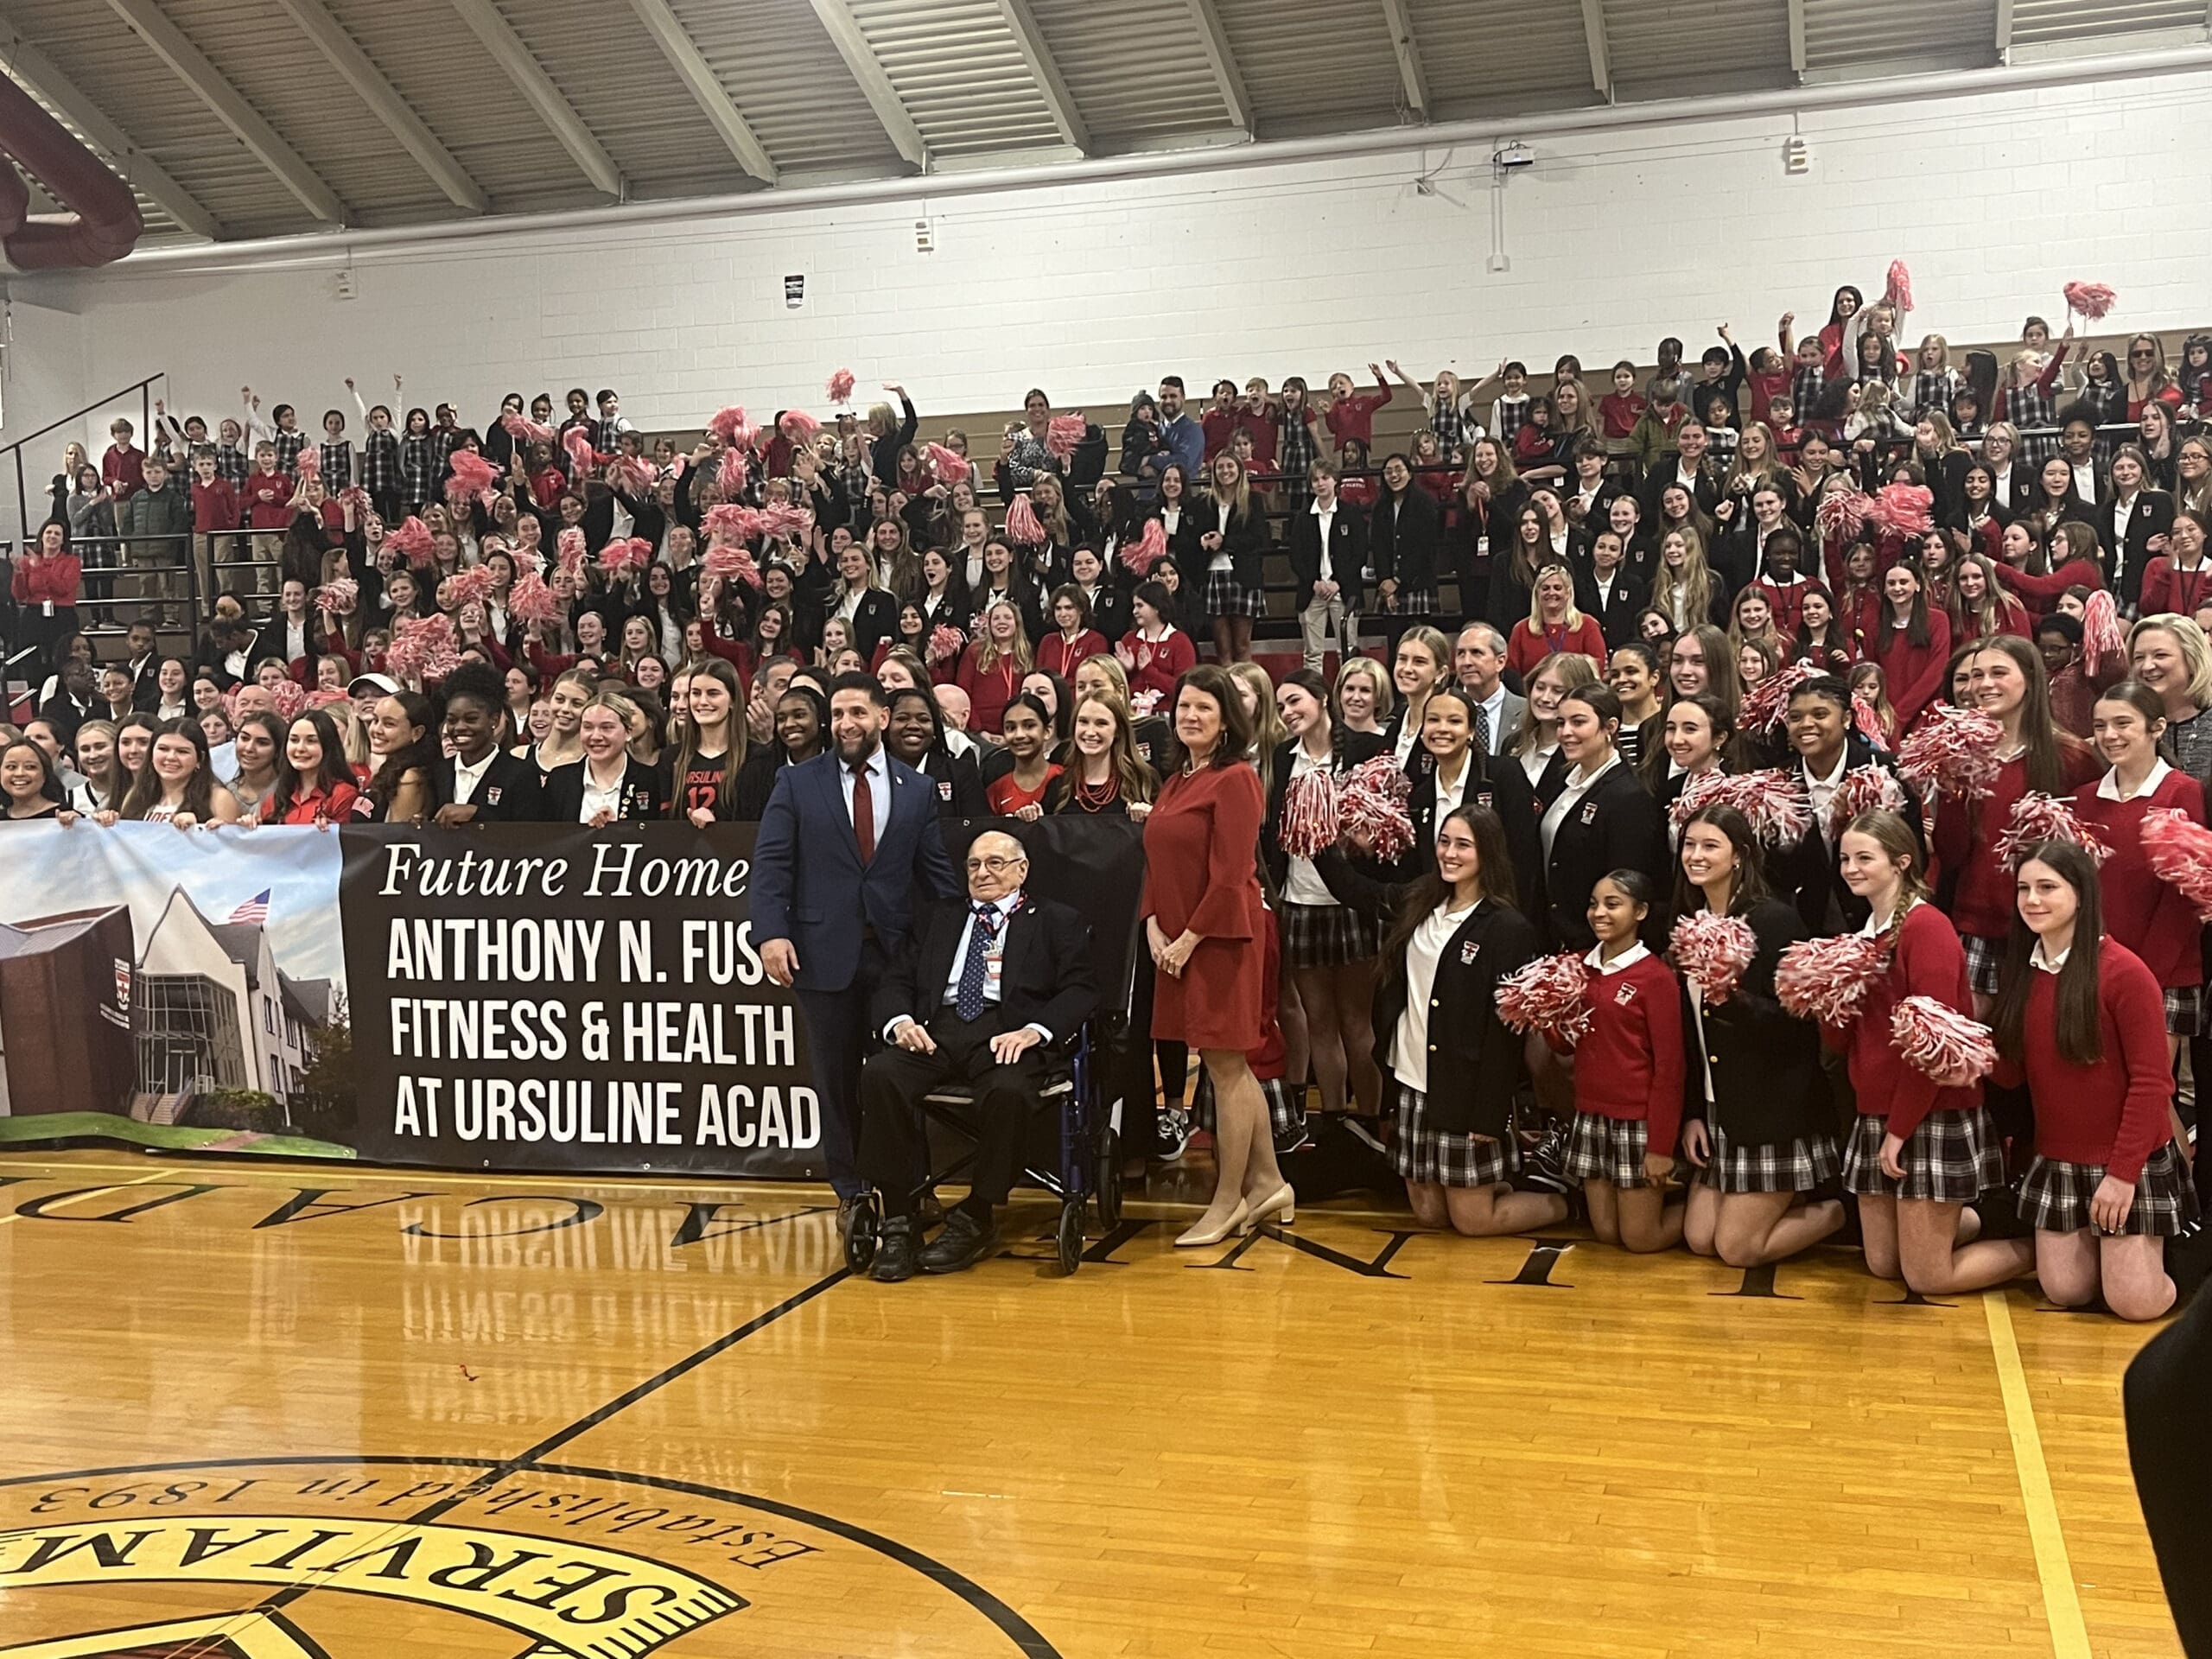 Hundreds of students packed the gym to celebrate the largest donation in Ursuline Academy history.